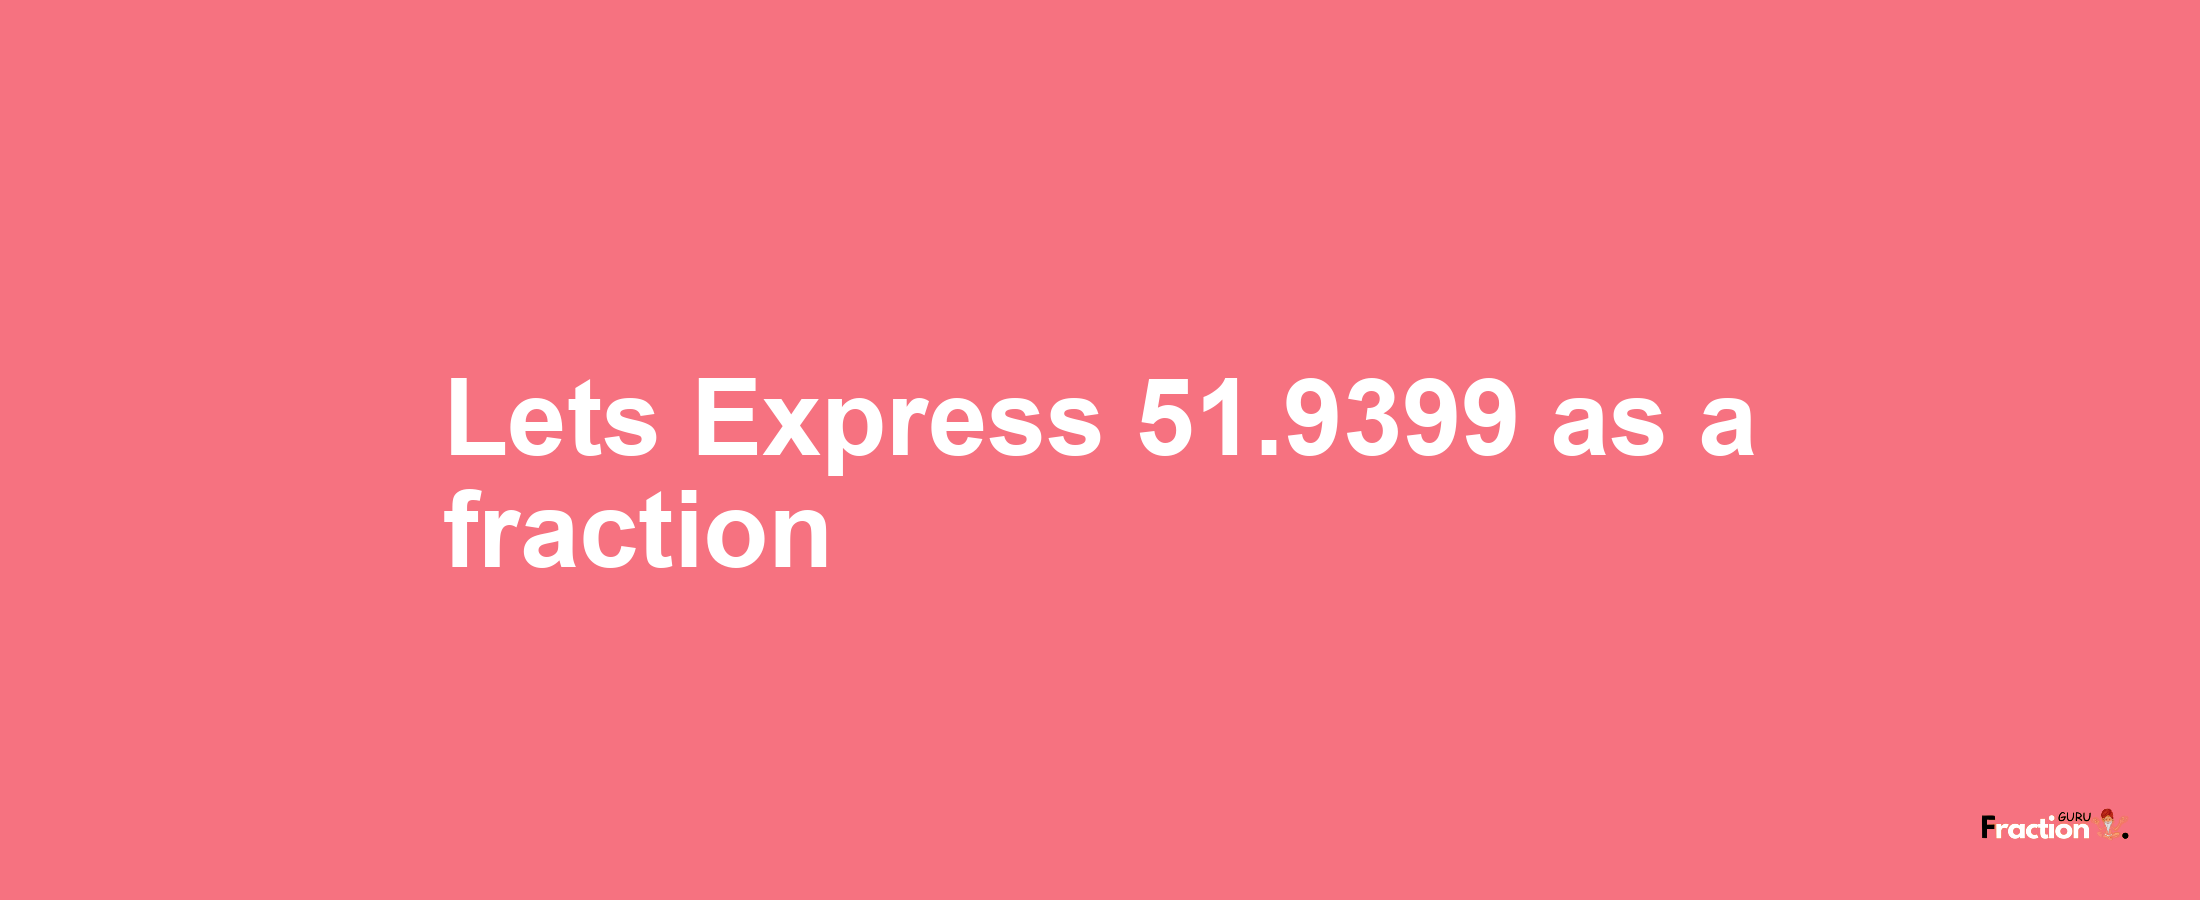 Lets Express 51.9399 as afraction